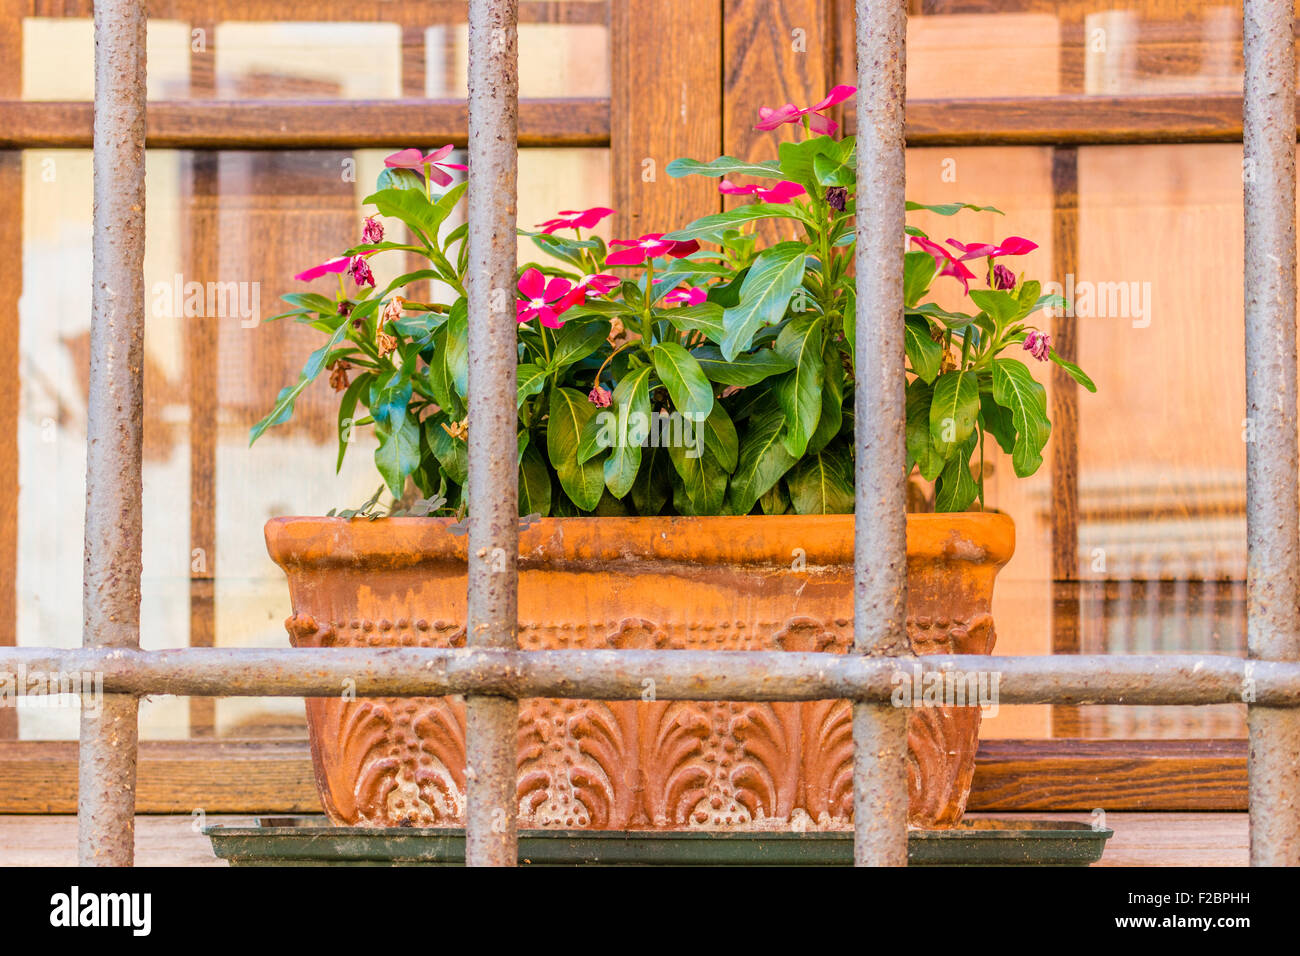 window with vintage black railings and pots of Impatiens Sultanii Stock Photo